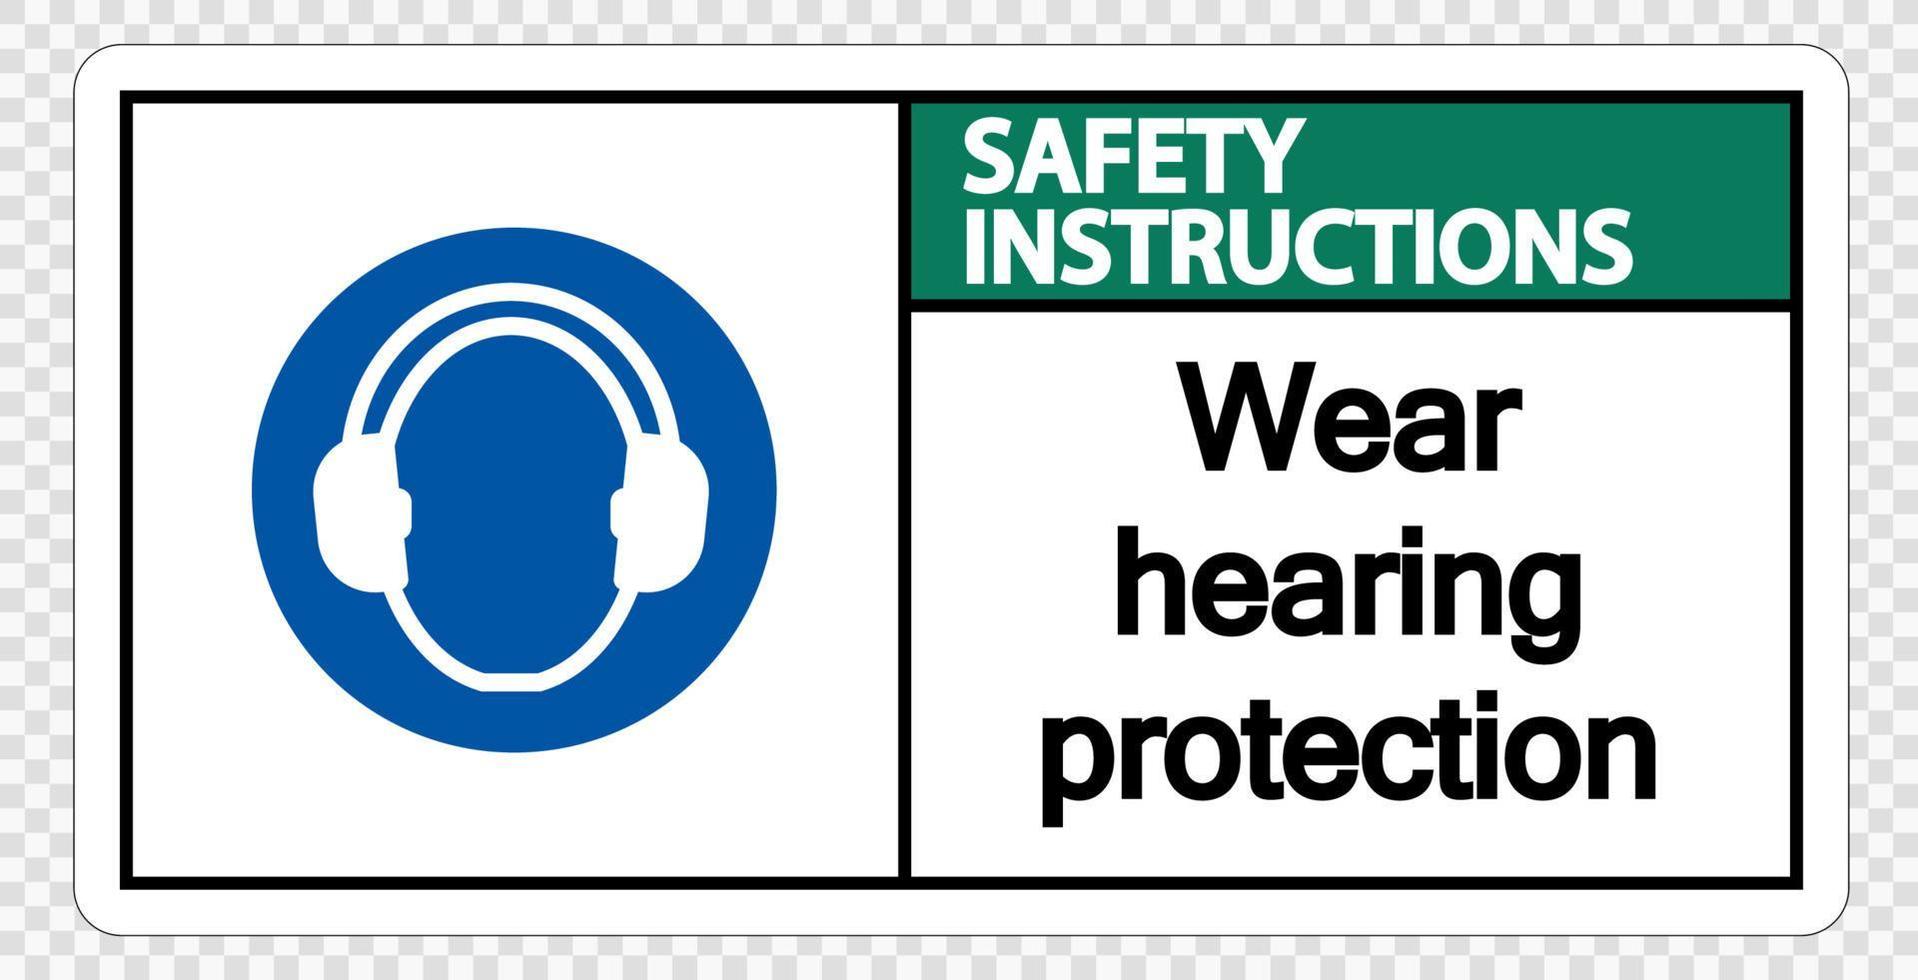 Safety instructions Wear hearing protection on transparent background vector